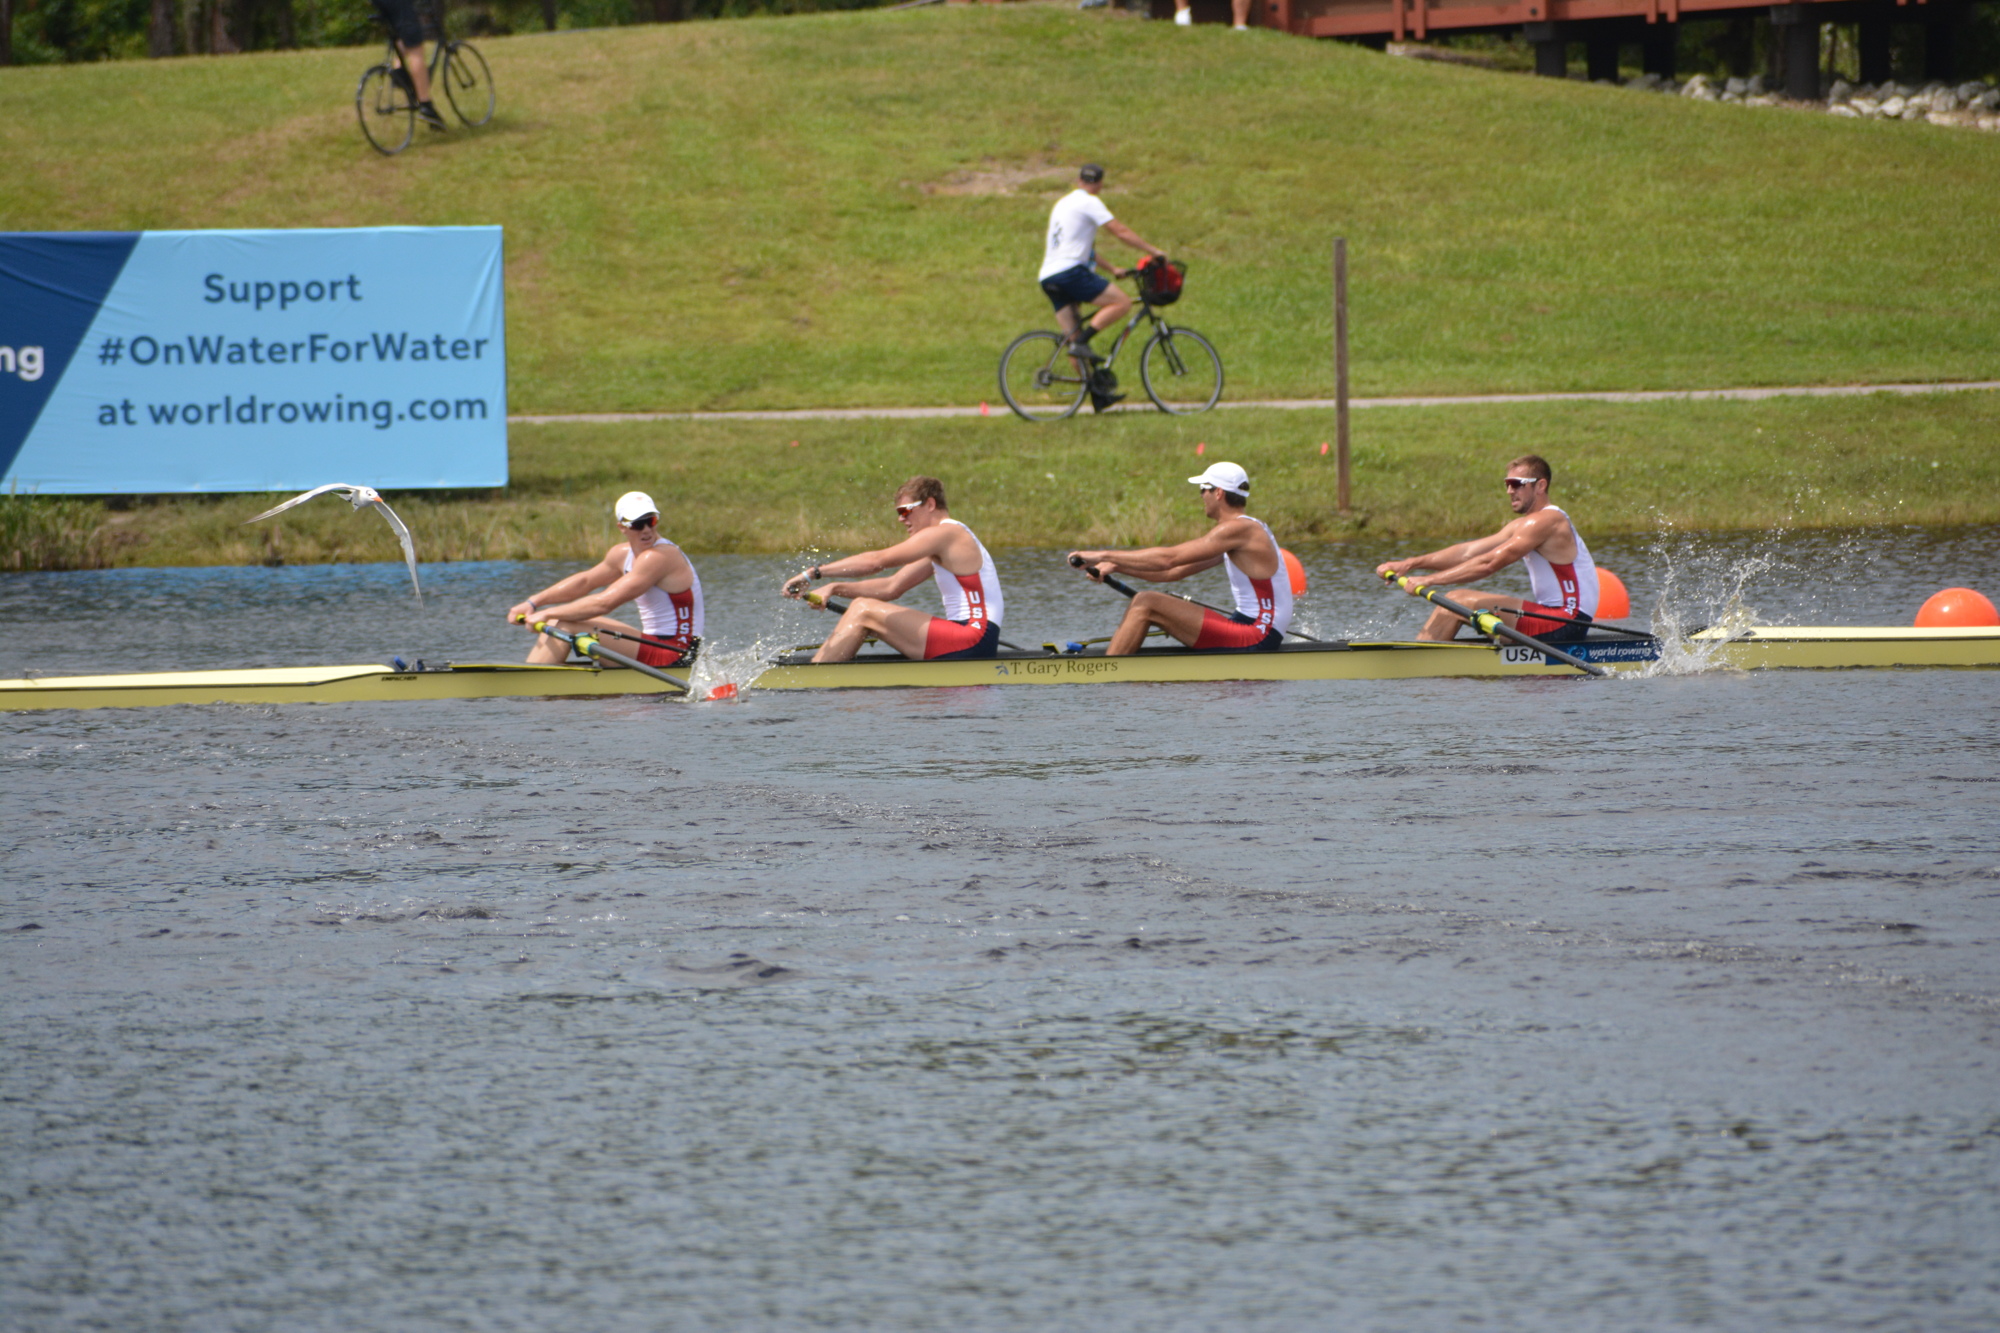 The U.S. men's four (4-) team of Ben Delaney, Alexander Richards, Robert Moffitt and Ben Ruble did better than their finish indicated.